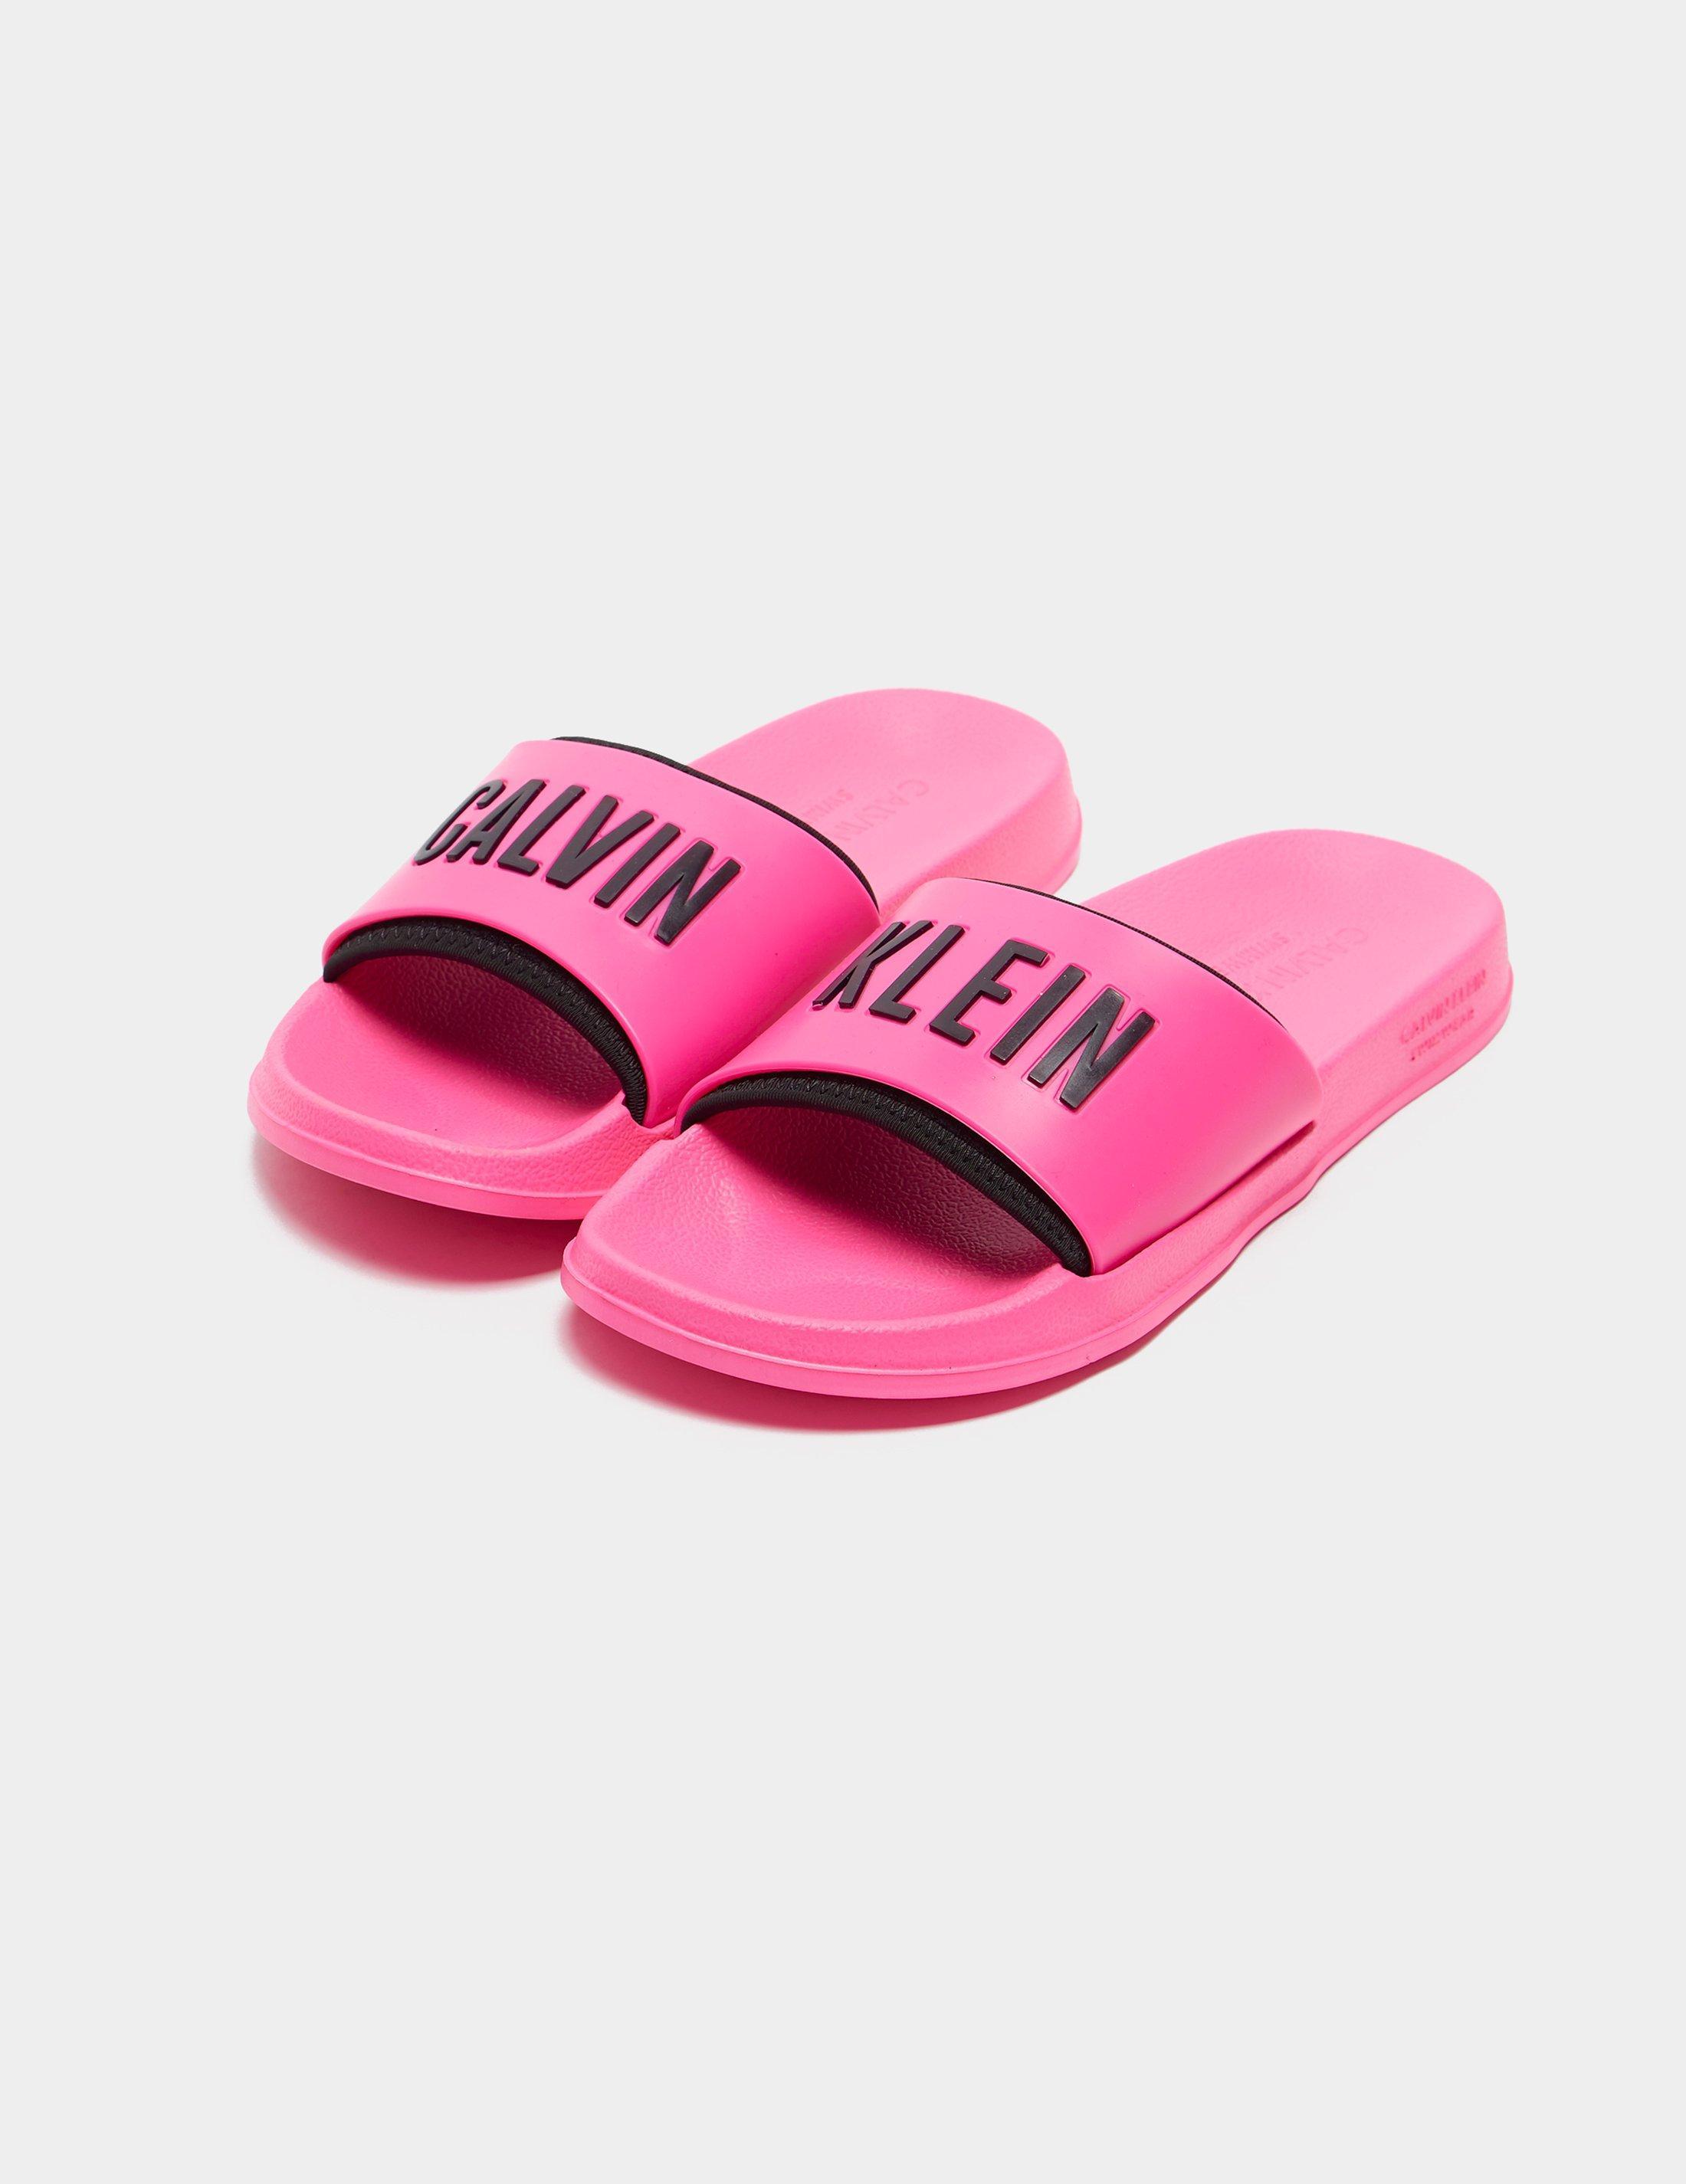 Calvin Klein Synthetic Pool Slides Pink - Lyst